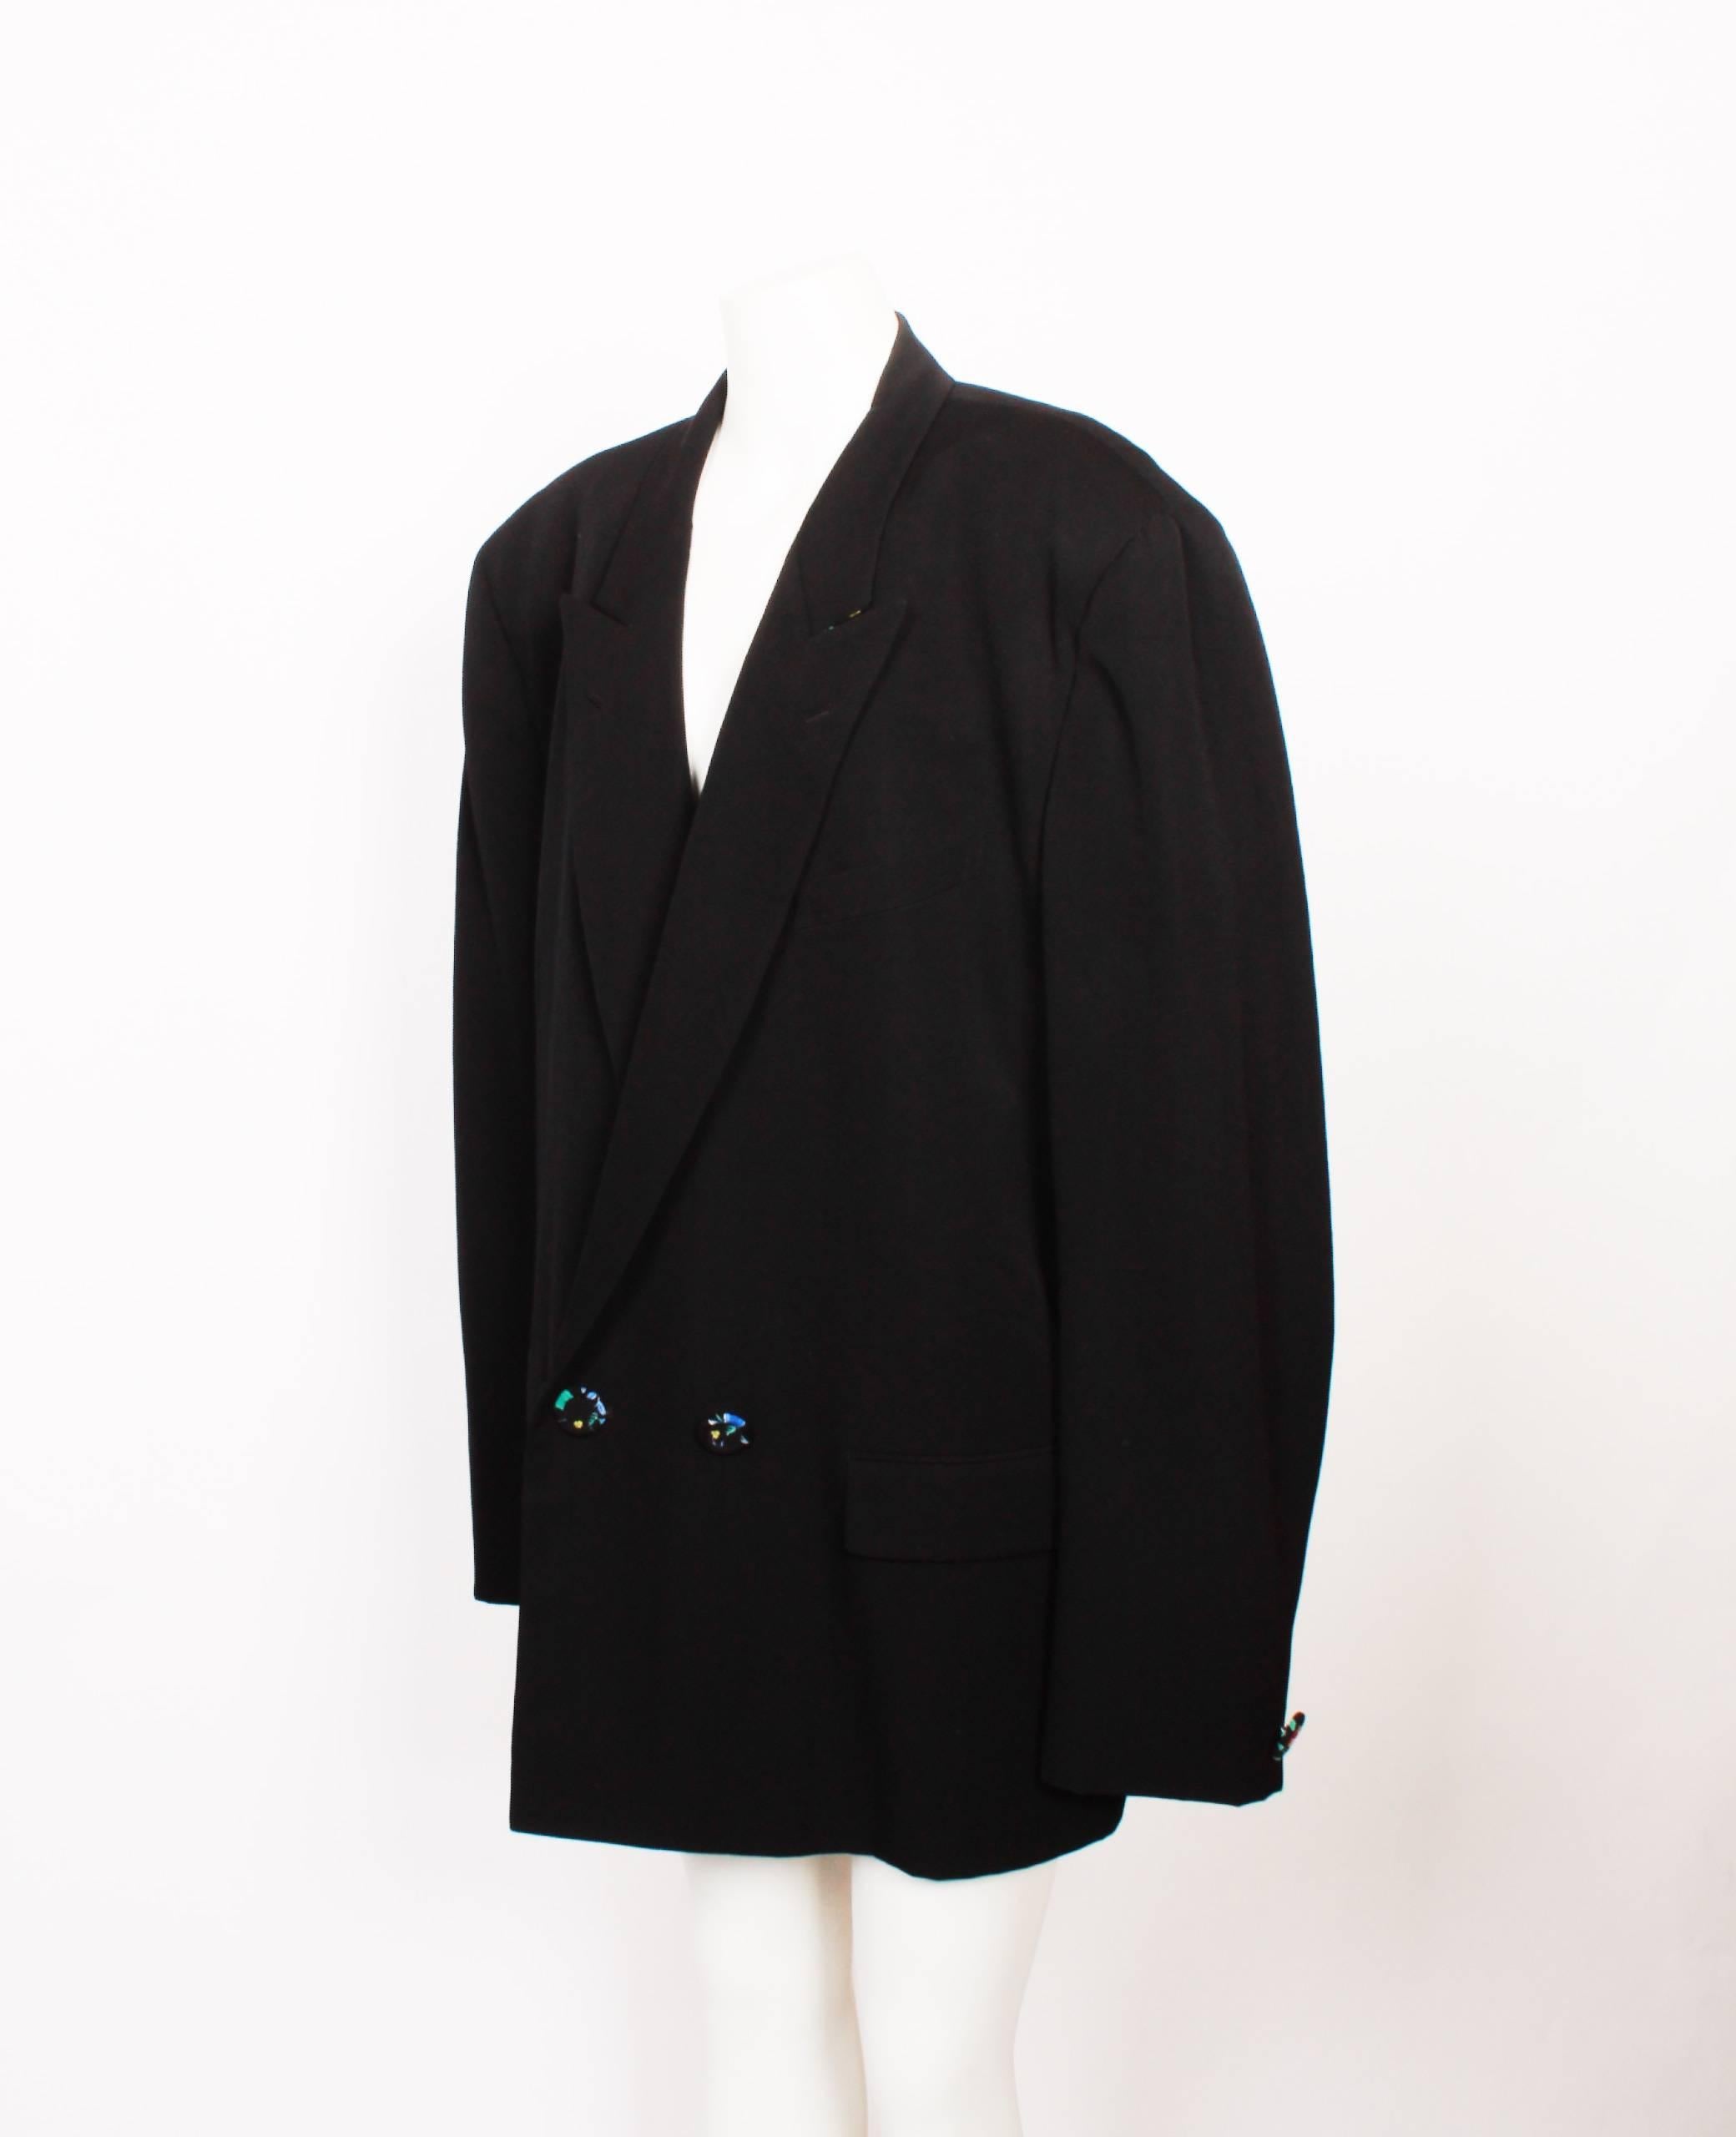 Black Comme des Garcons Blazer featuring printed floral button design, with matching floral collar detailing on underside. Size Large.


Comme des Garçons headed by Rei Kawakubo  is regarded by many in the fashion industry as a leader of innovative